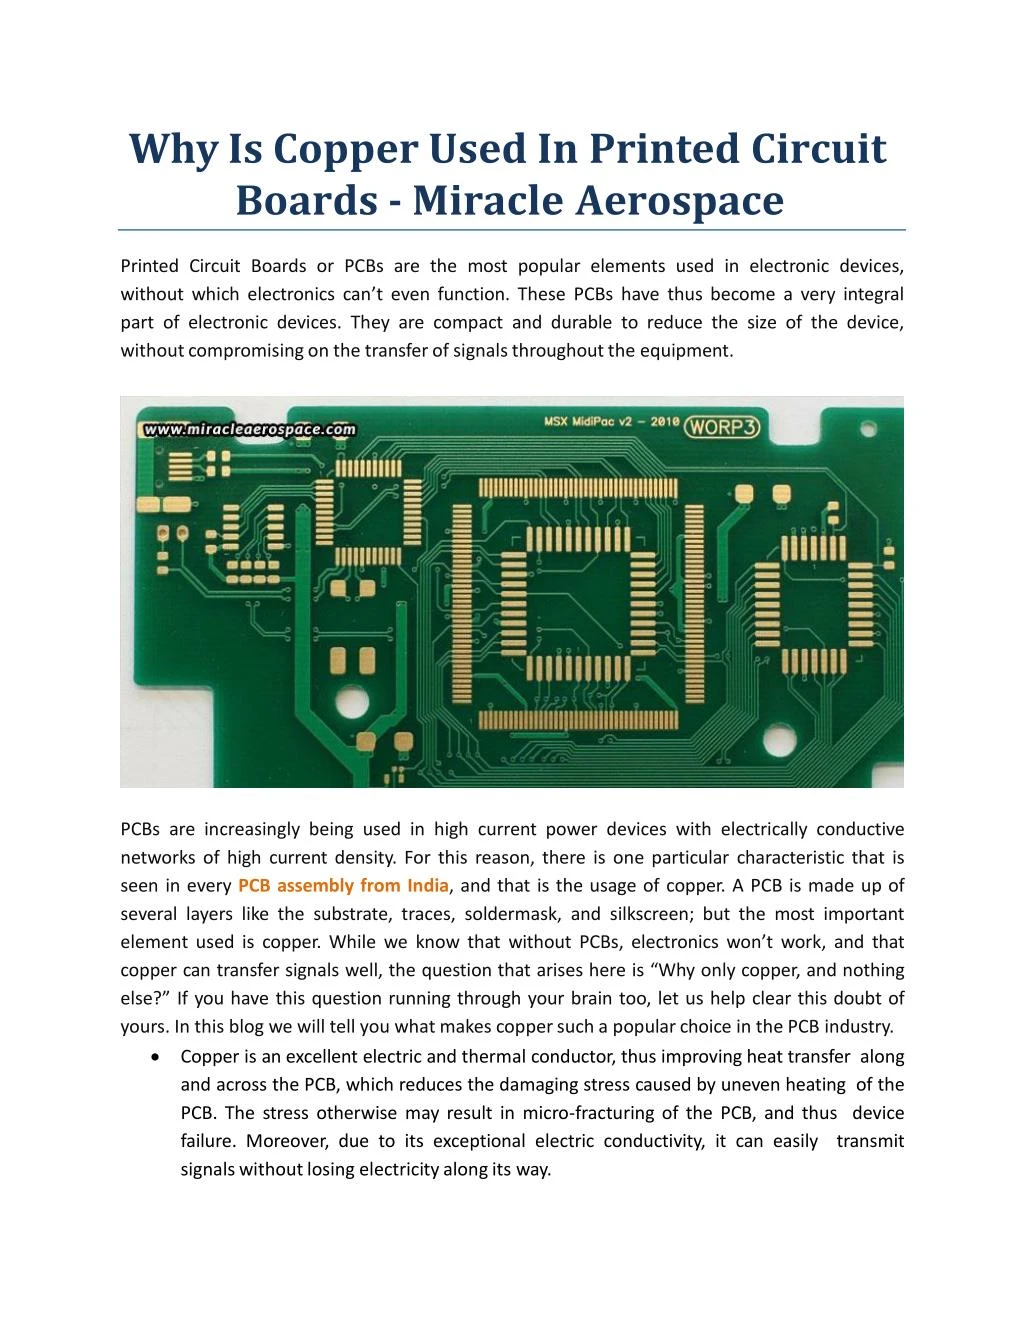 why is copper used in printed circuit boards miracle aerospace